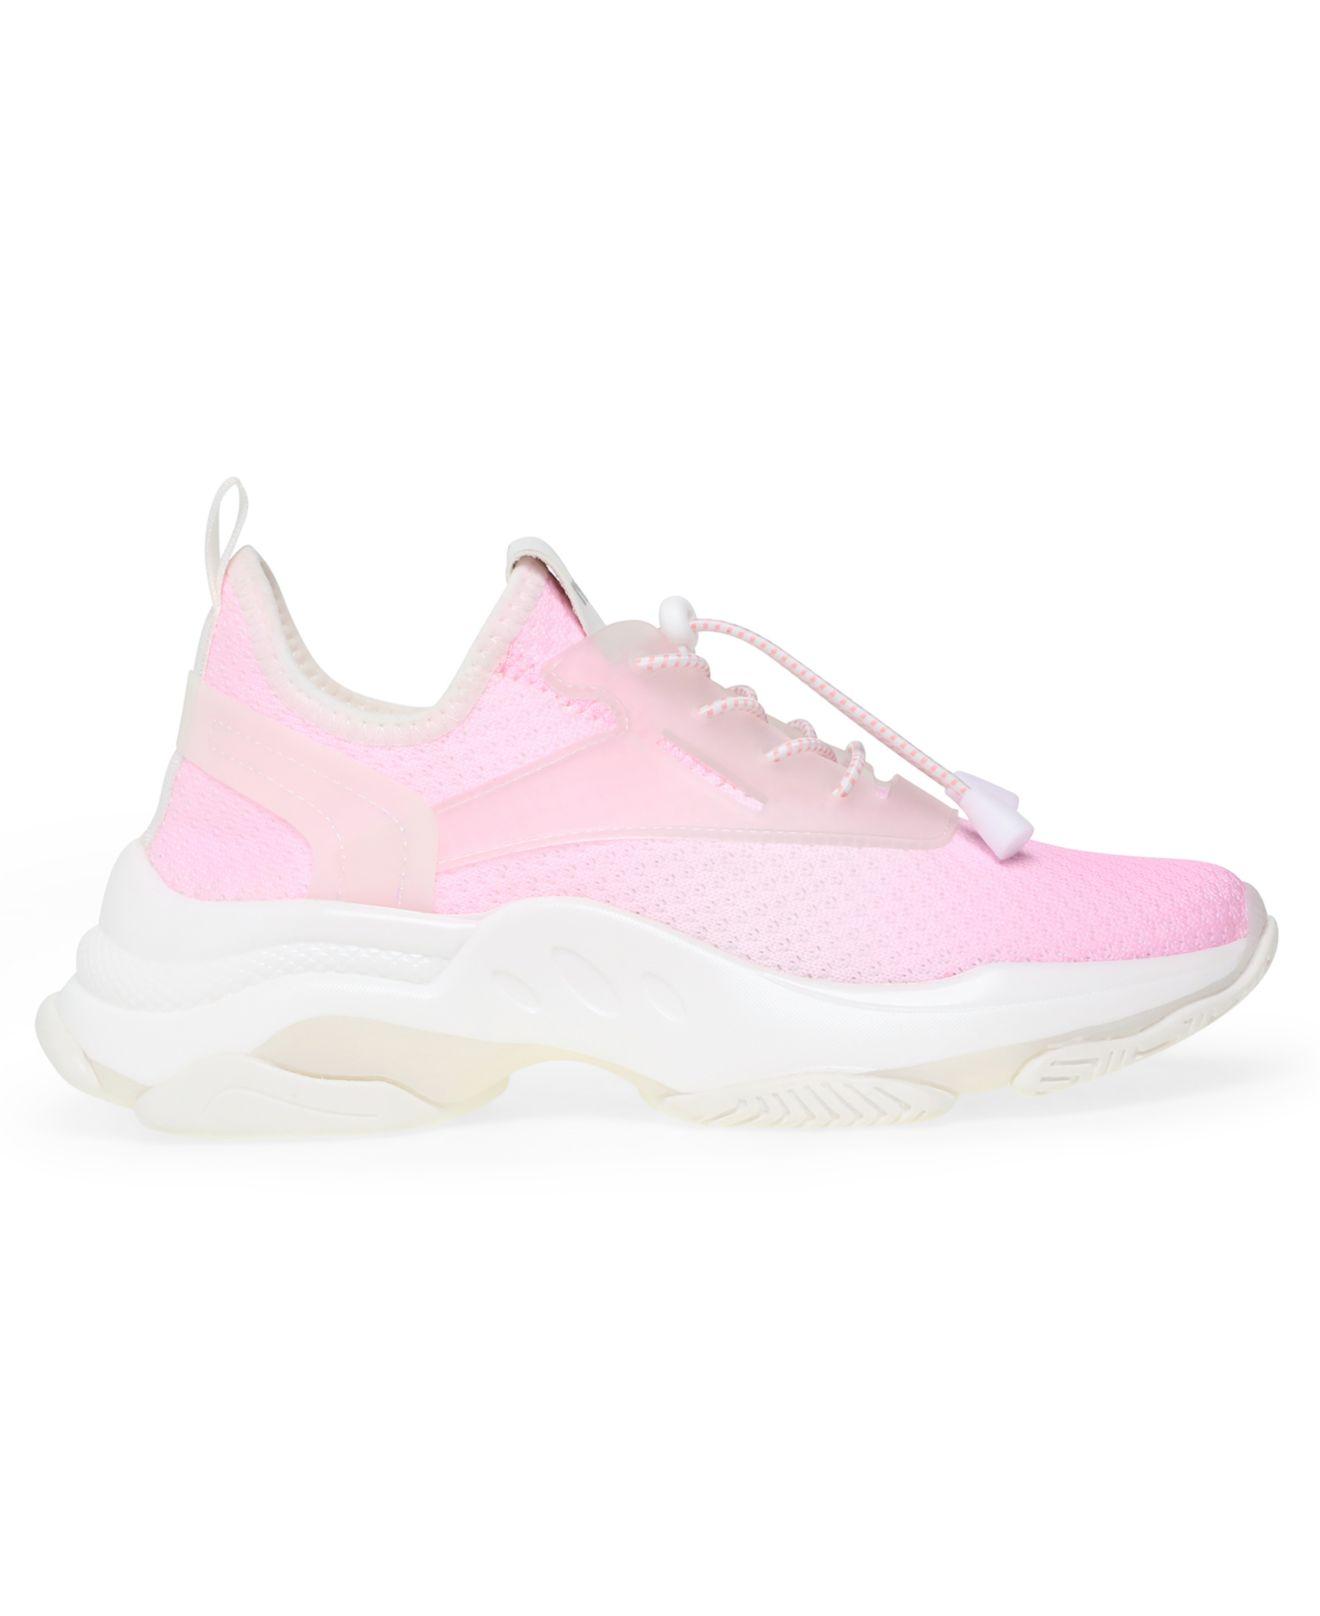 Steve Madden Myles Knit Chunky Sneakers in Pink | Lyst